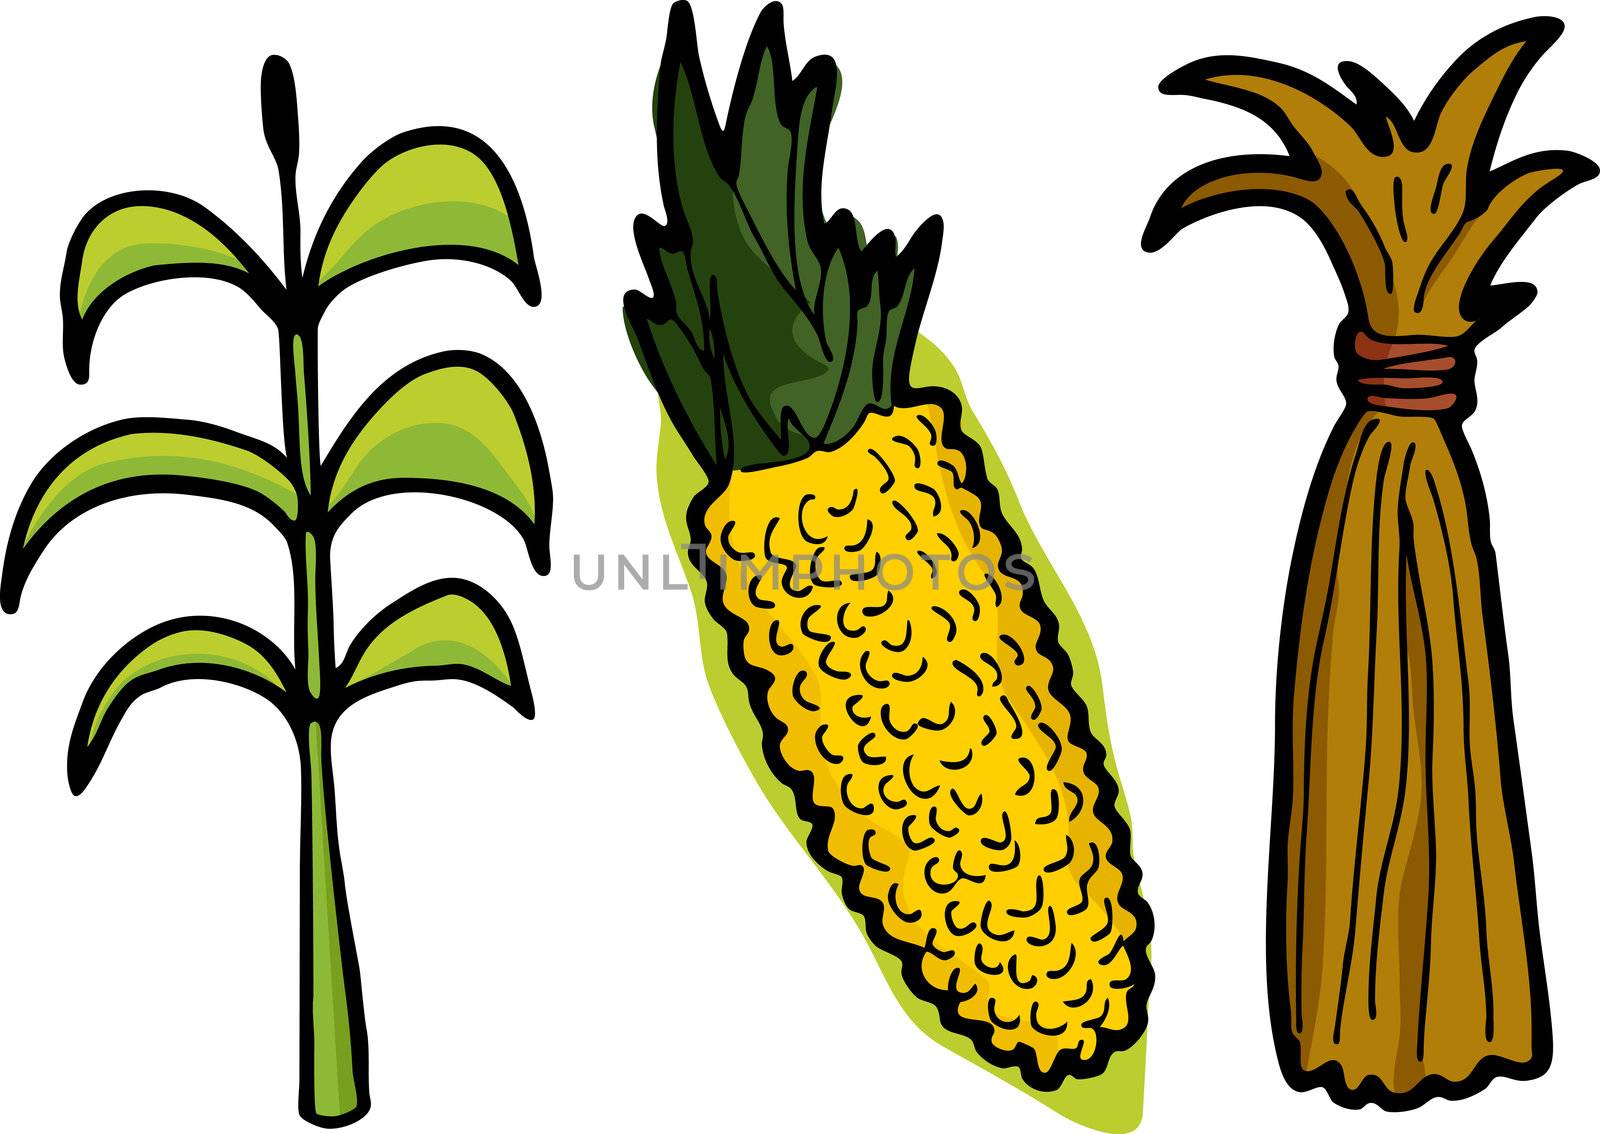 Corn in Three Stages by TheBlackRhino